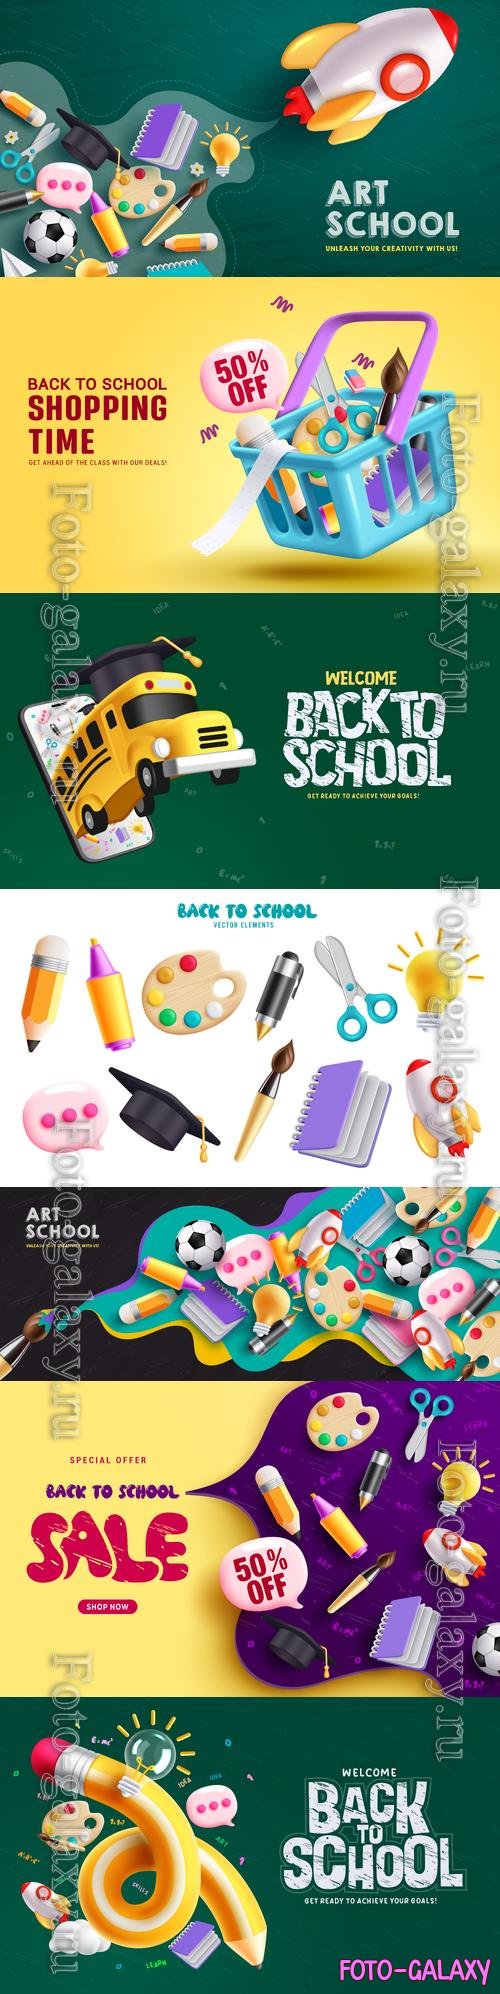 Back to school vector banner, sale design school special offer promotion text